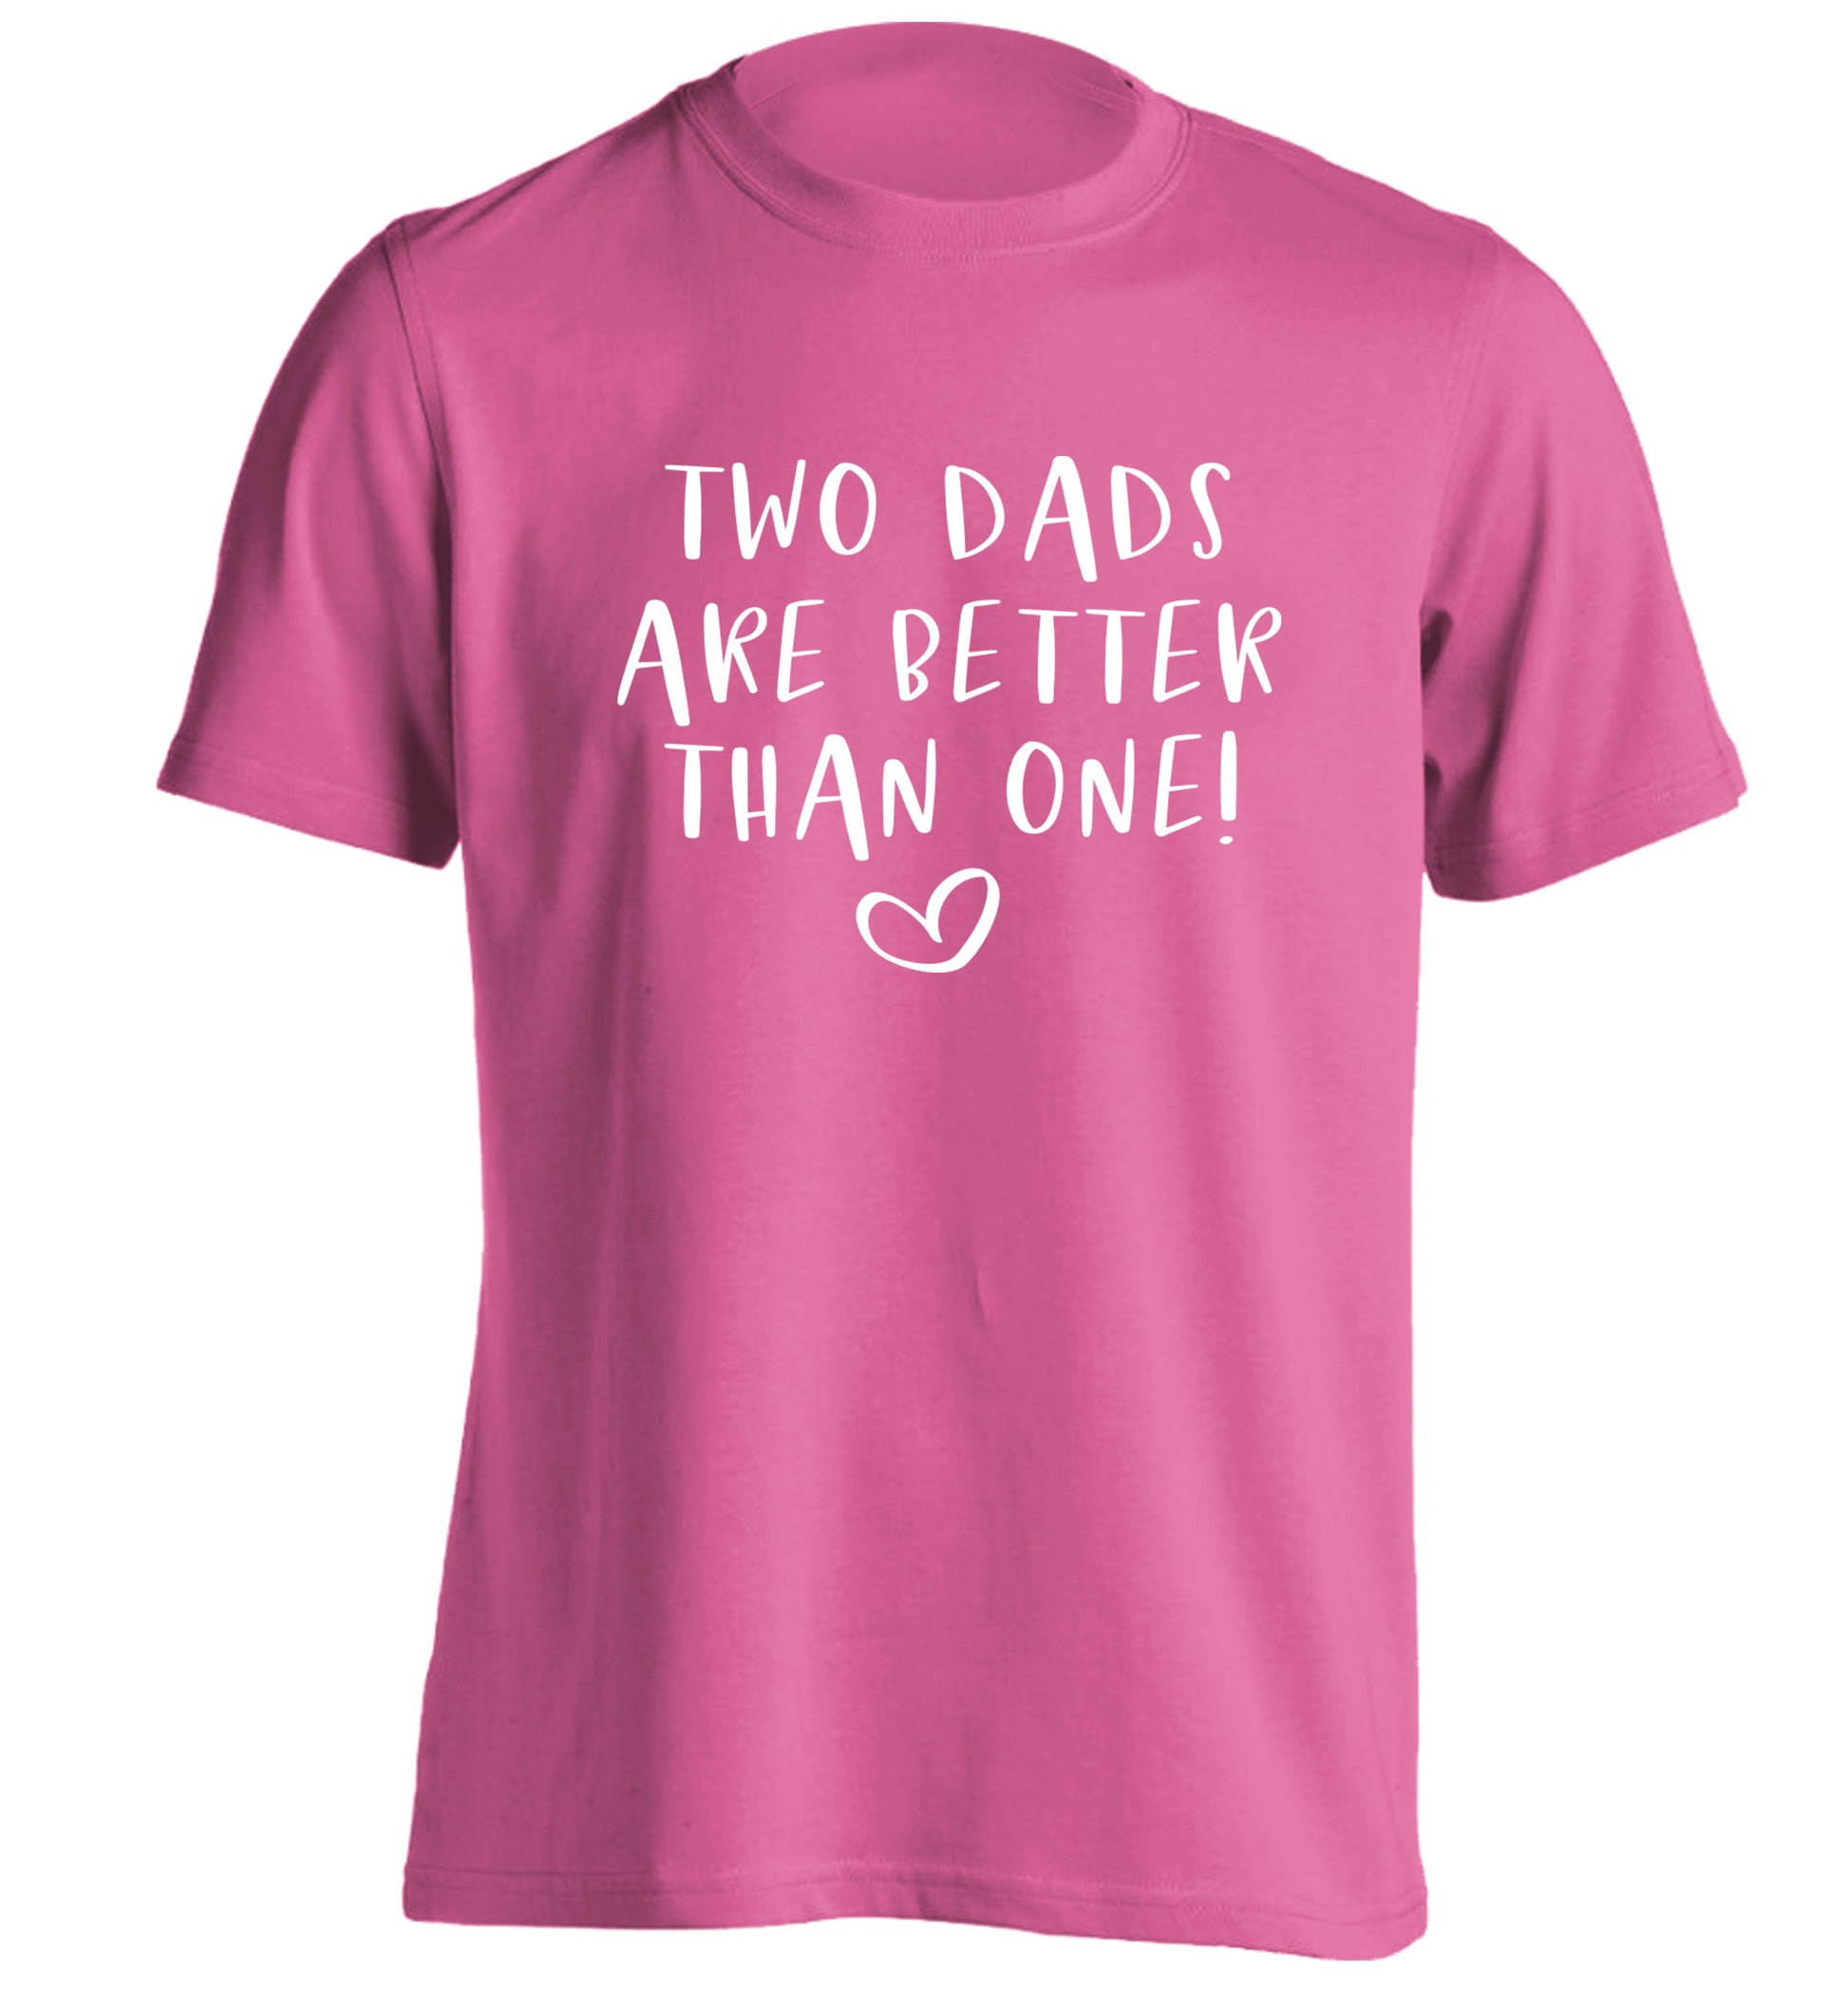 Two dads are better than one adults unisex pink Tshirt 2XL